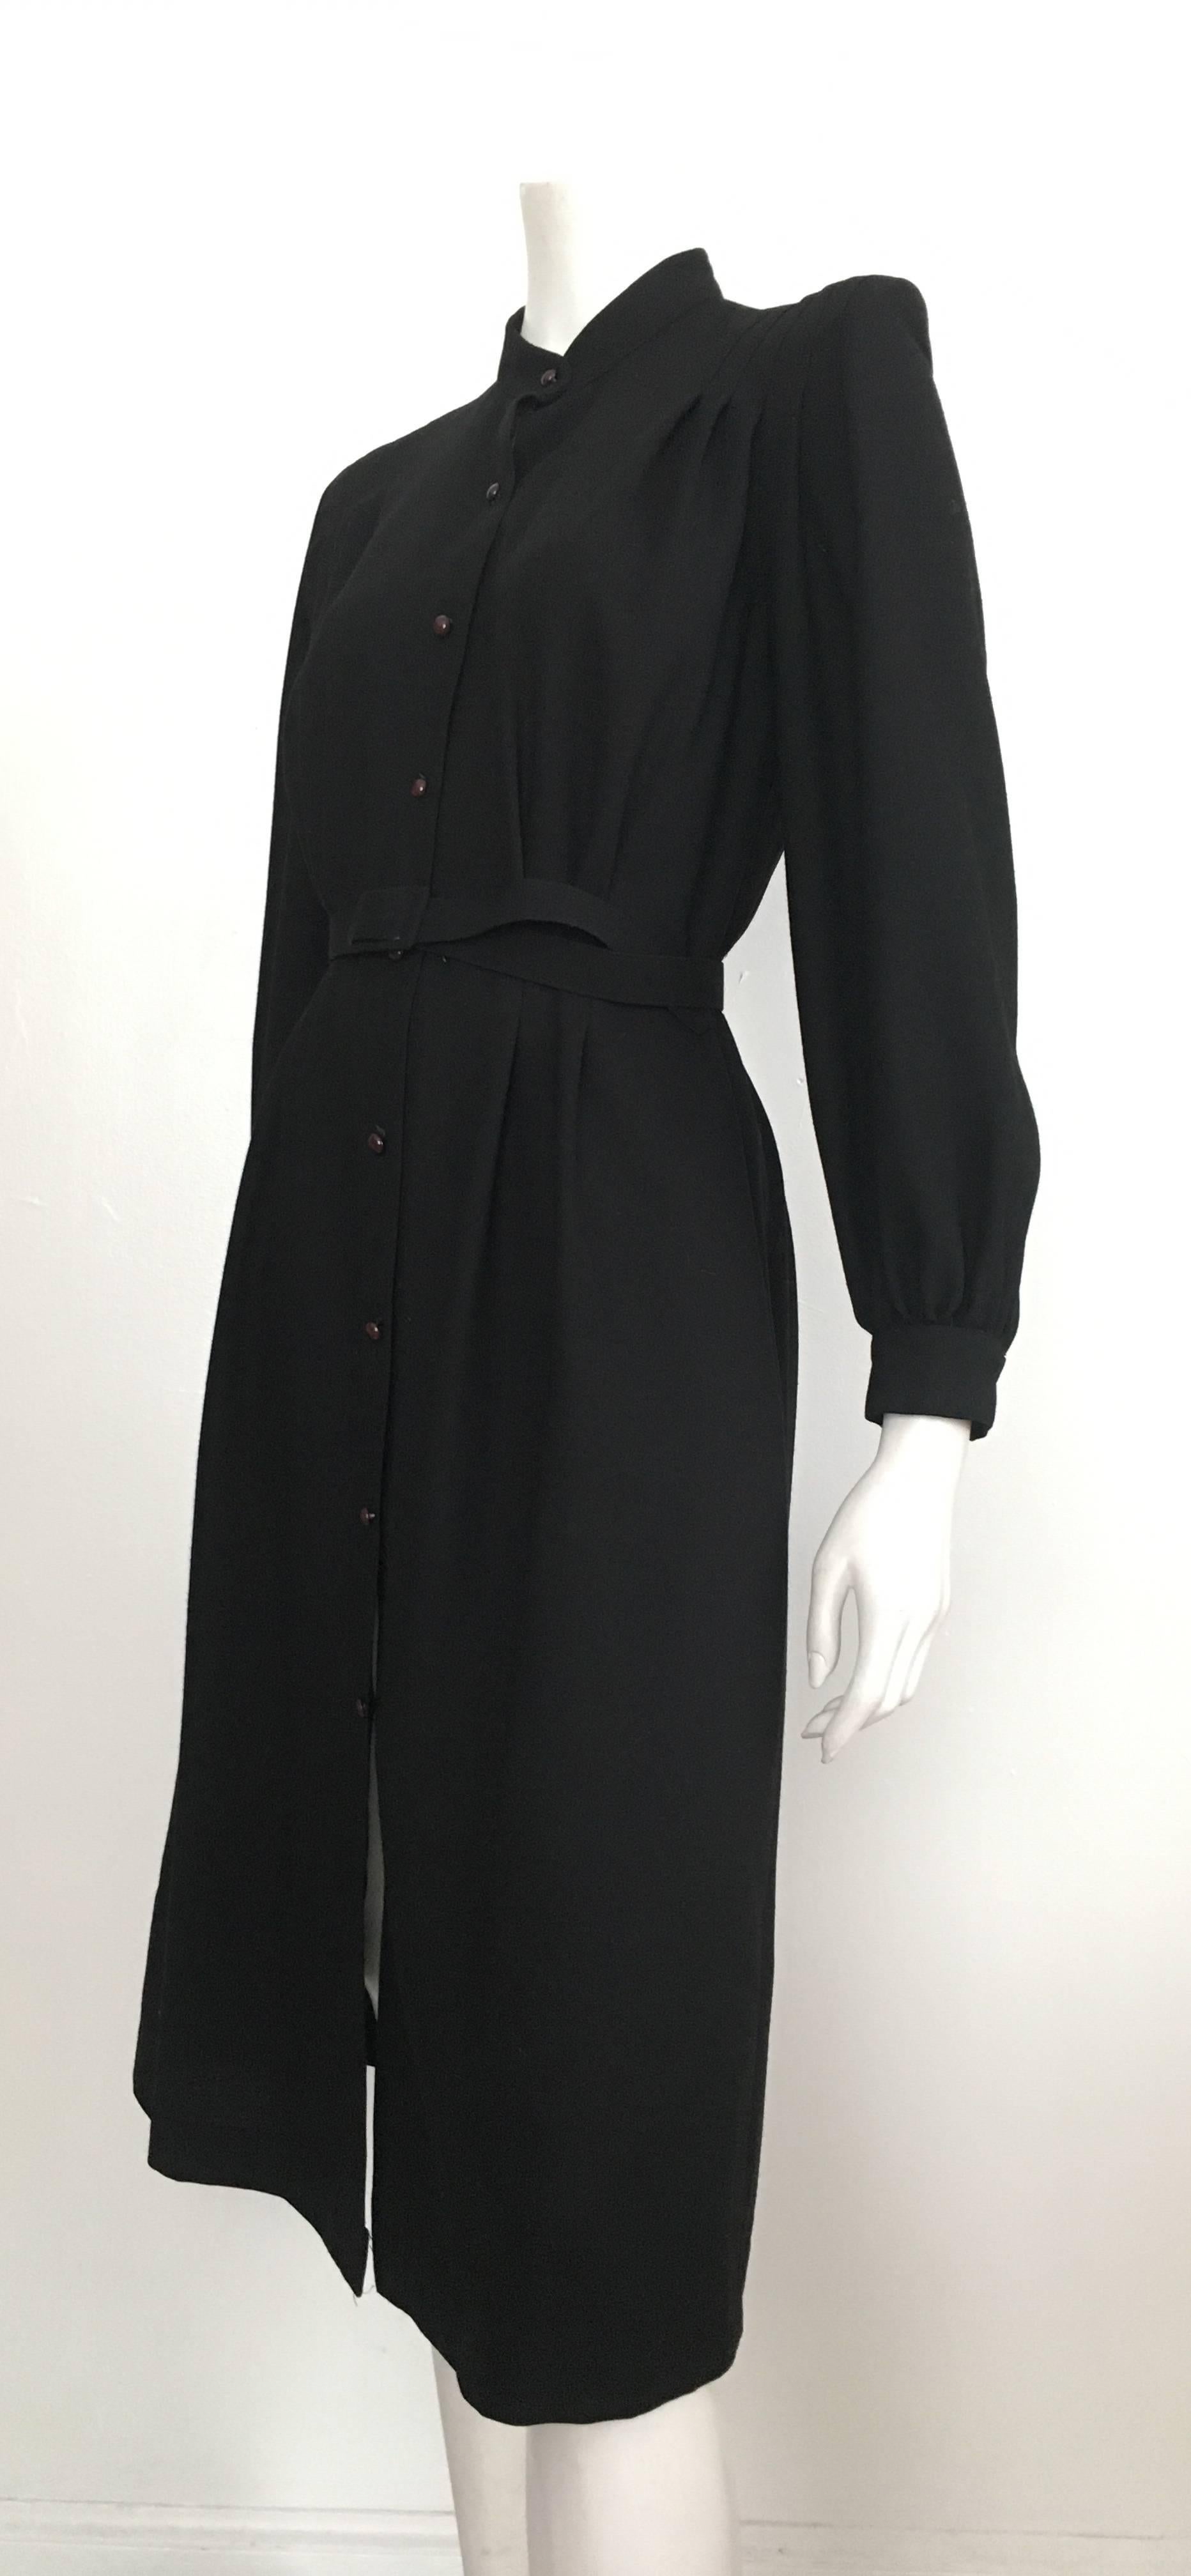 Pierre Cardin 1980s Black Wool Button Up Dress with Pockets Size 6/8. 3